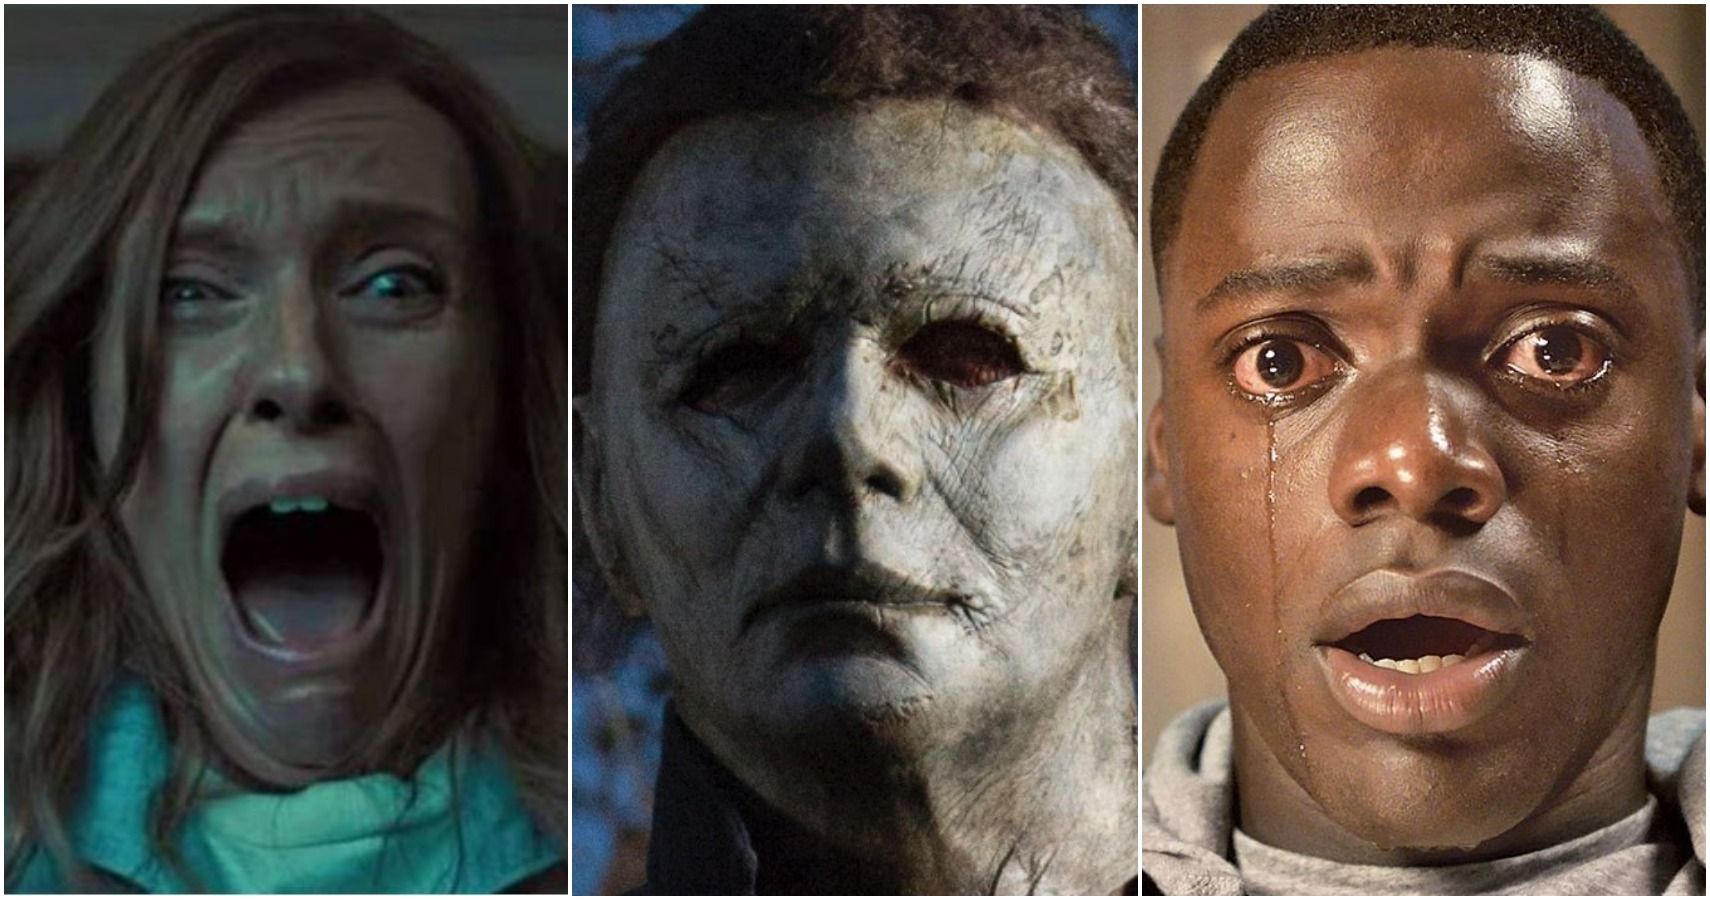 scariest recent movies